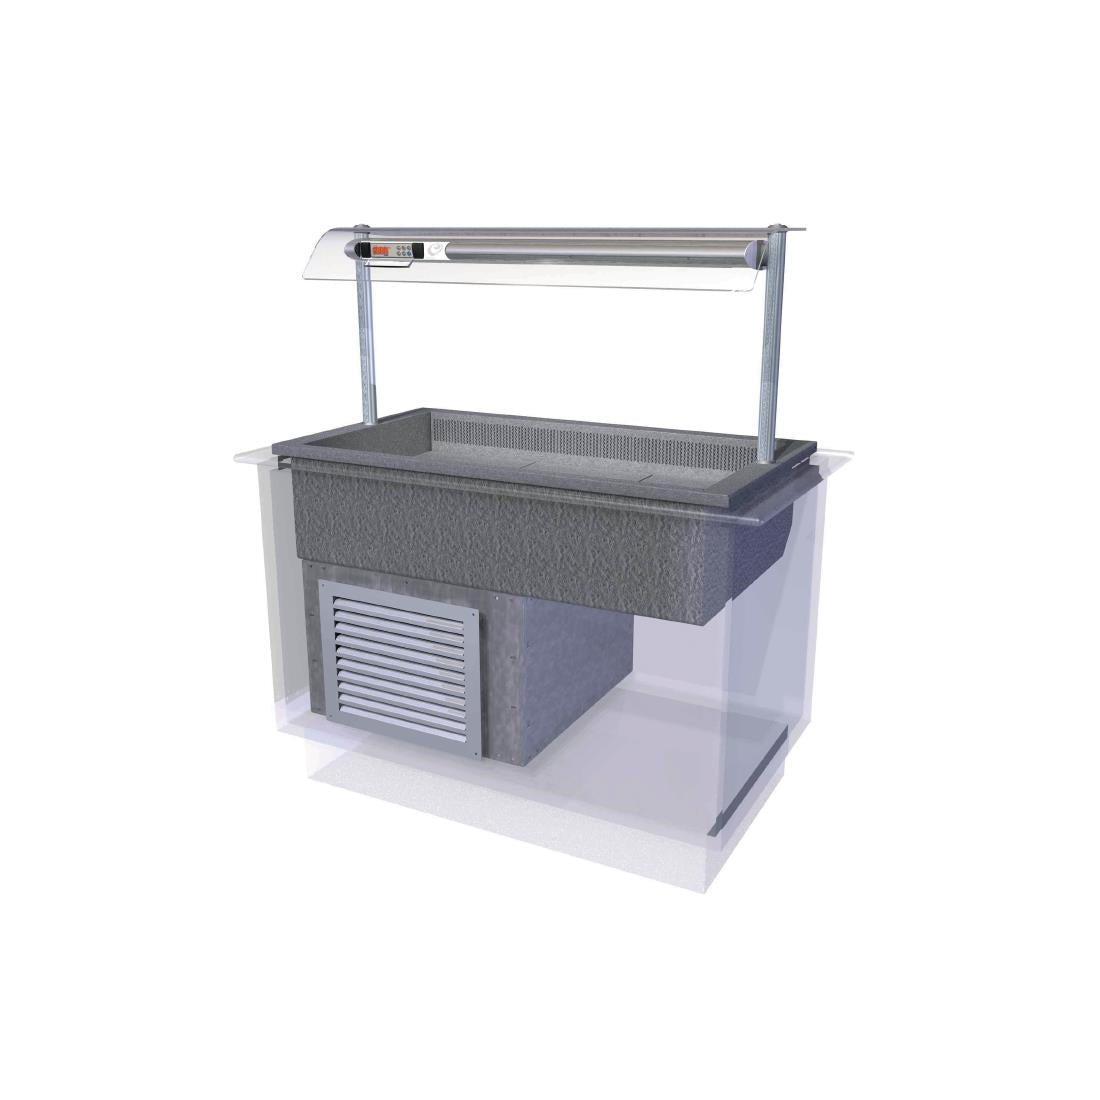 CW612 Designline Drop In Cold Well Self Service 1525mm JD Catering Equipment Solutions Ltd